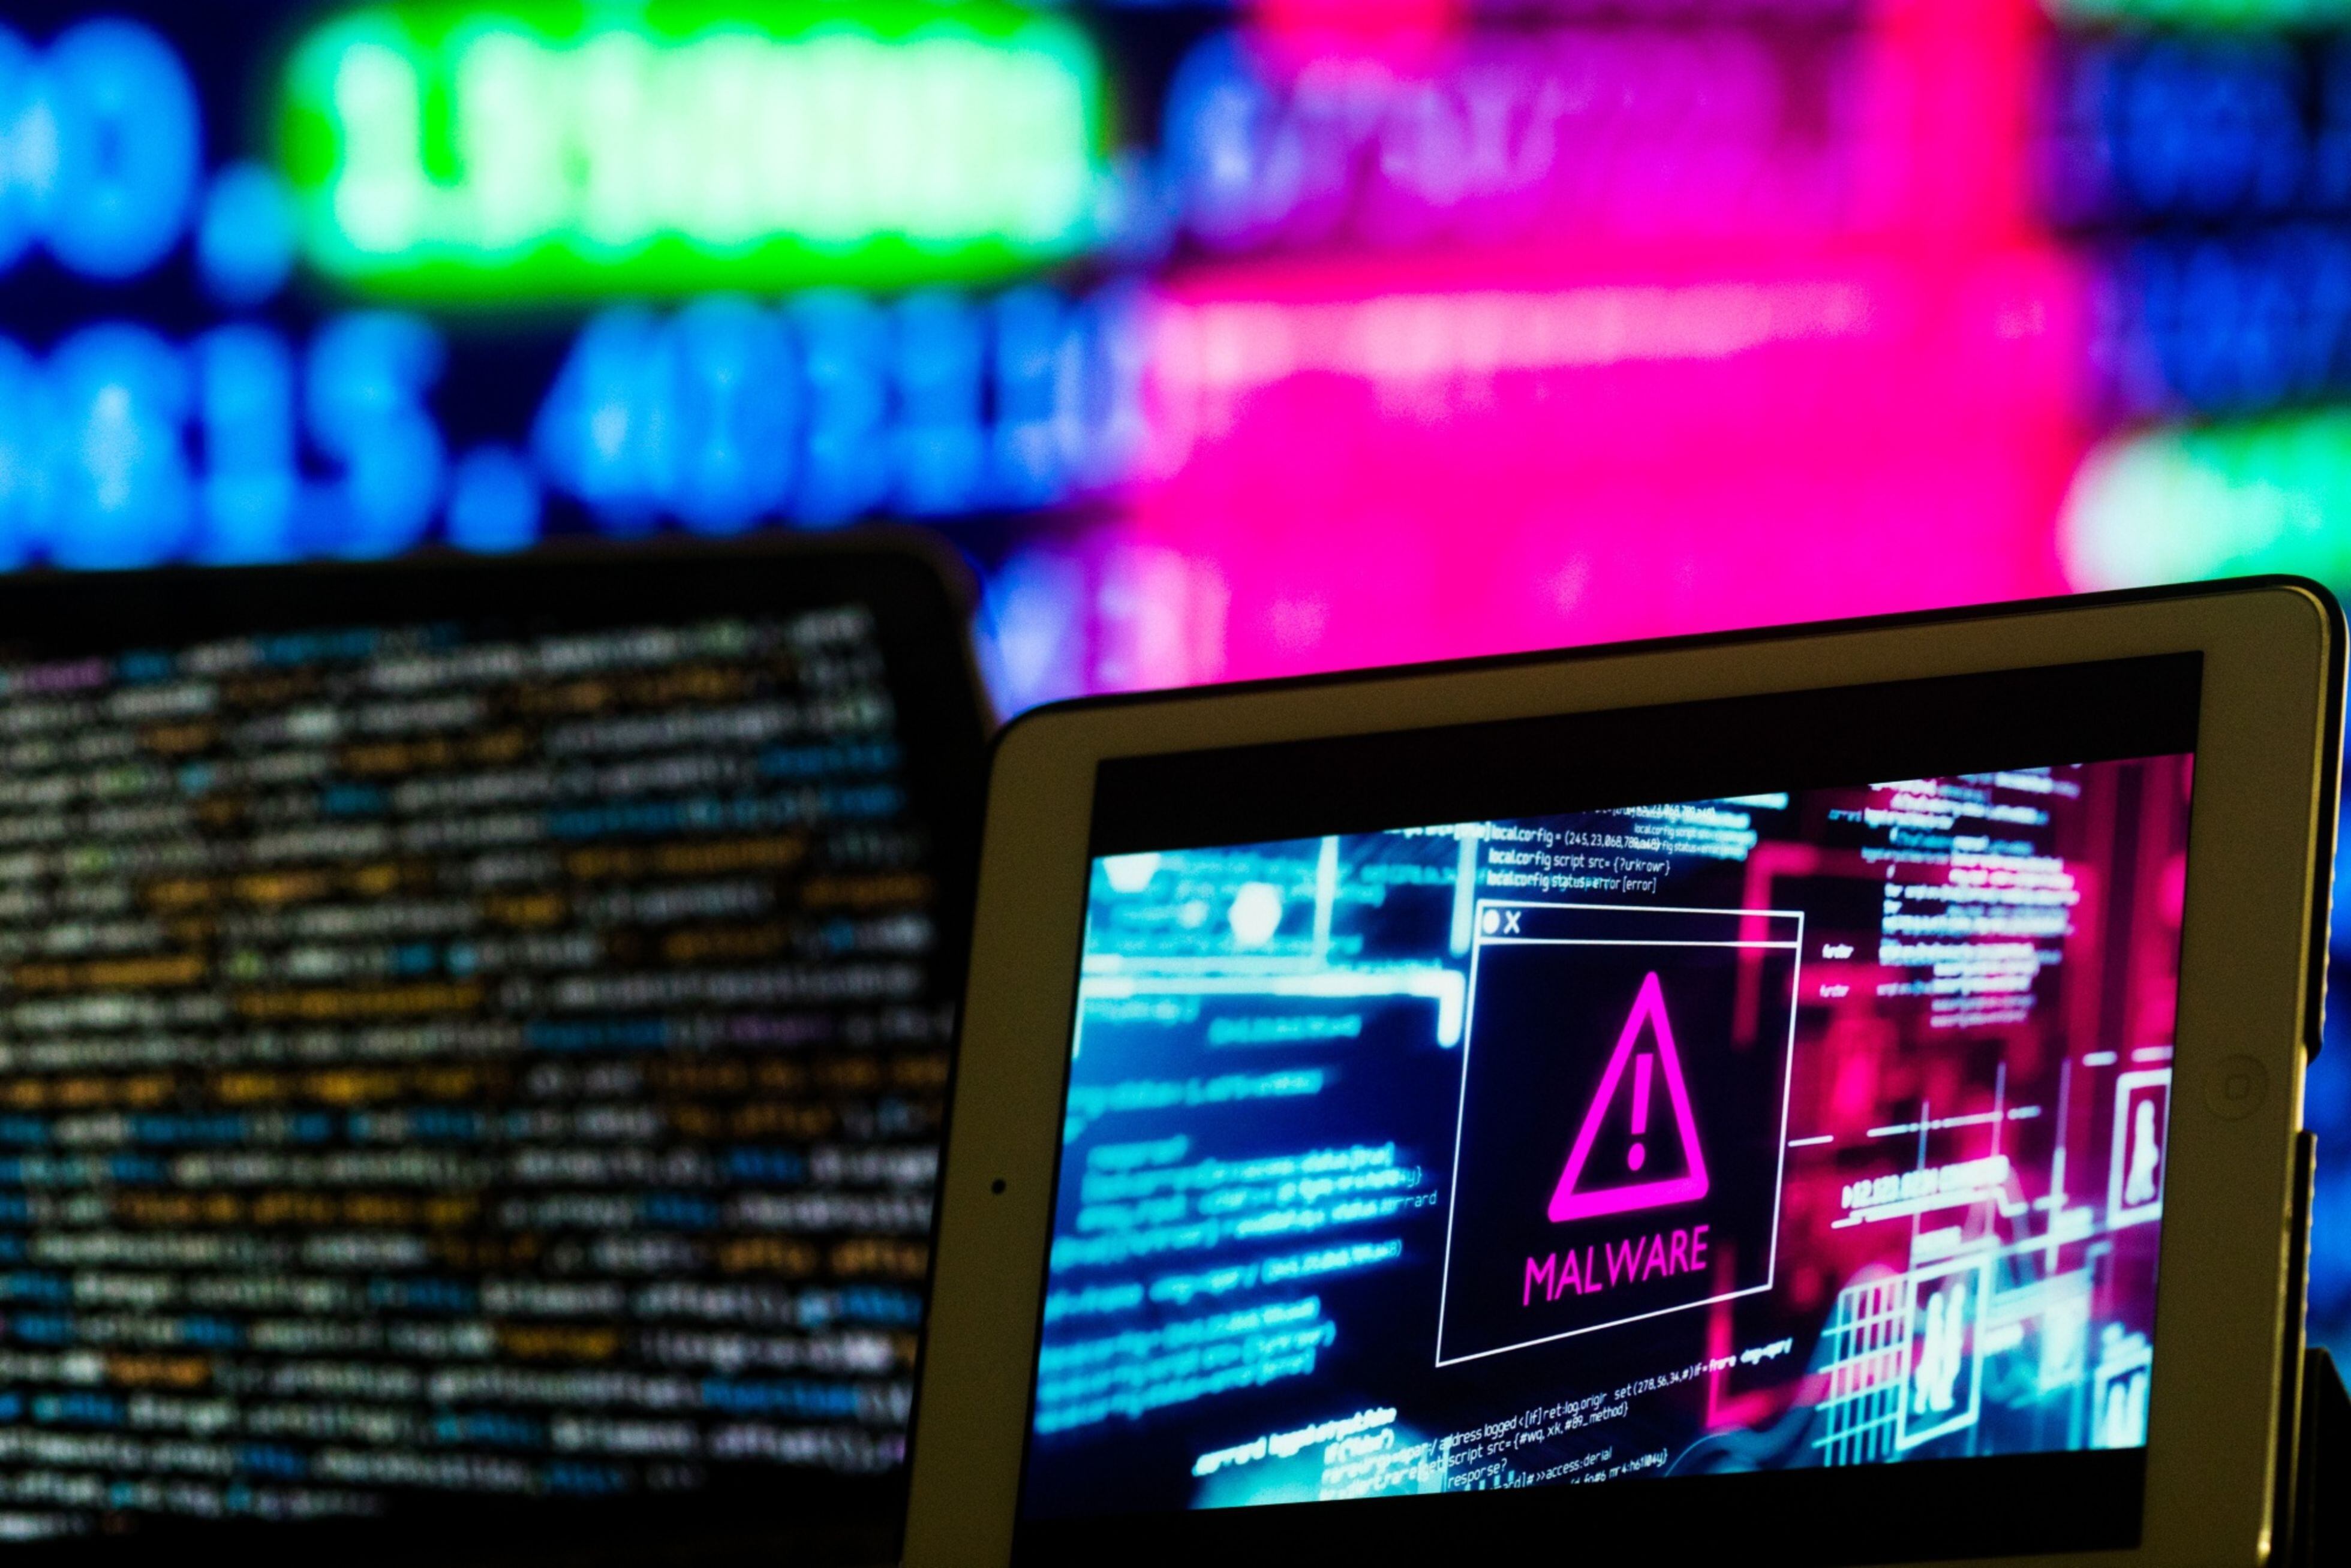 Whether through Malware or DDoS attacks, the objective of cyberattacks was none other than to generate chaos and disable platforms and equipment.  (Photo: Chris Ratcliffe/Bloomberg)